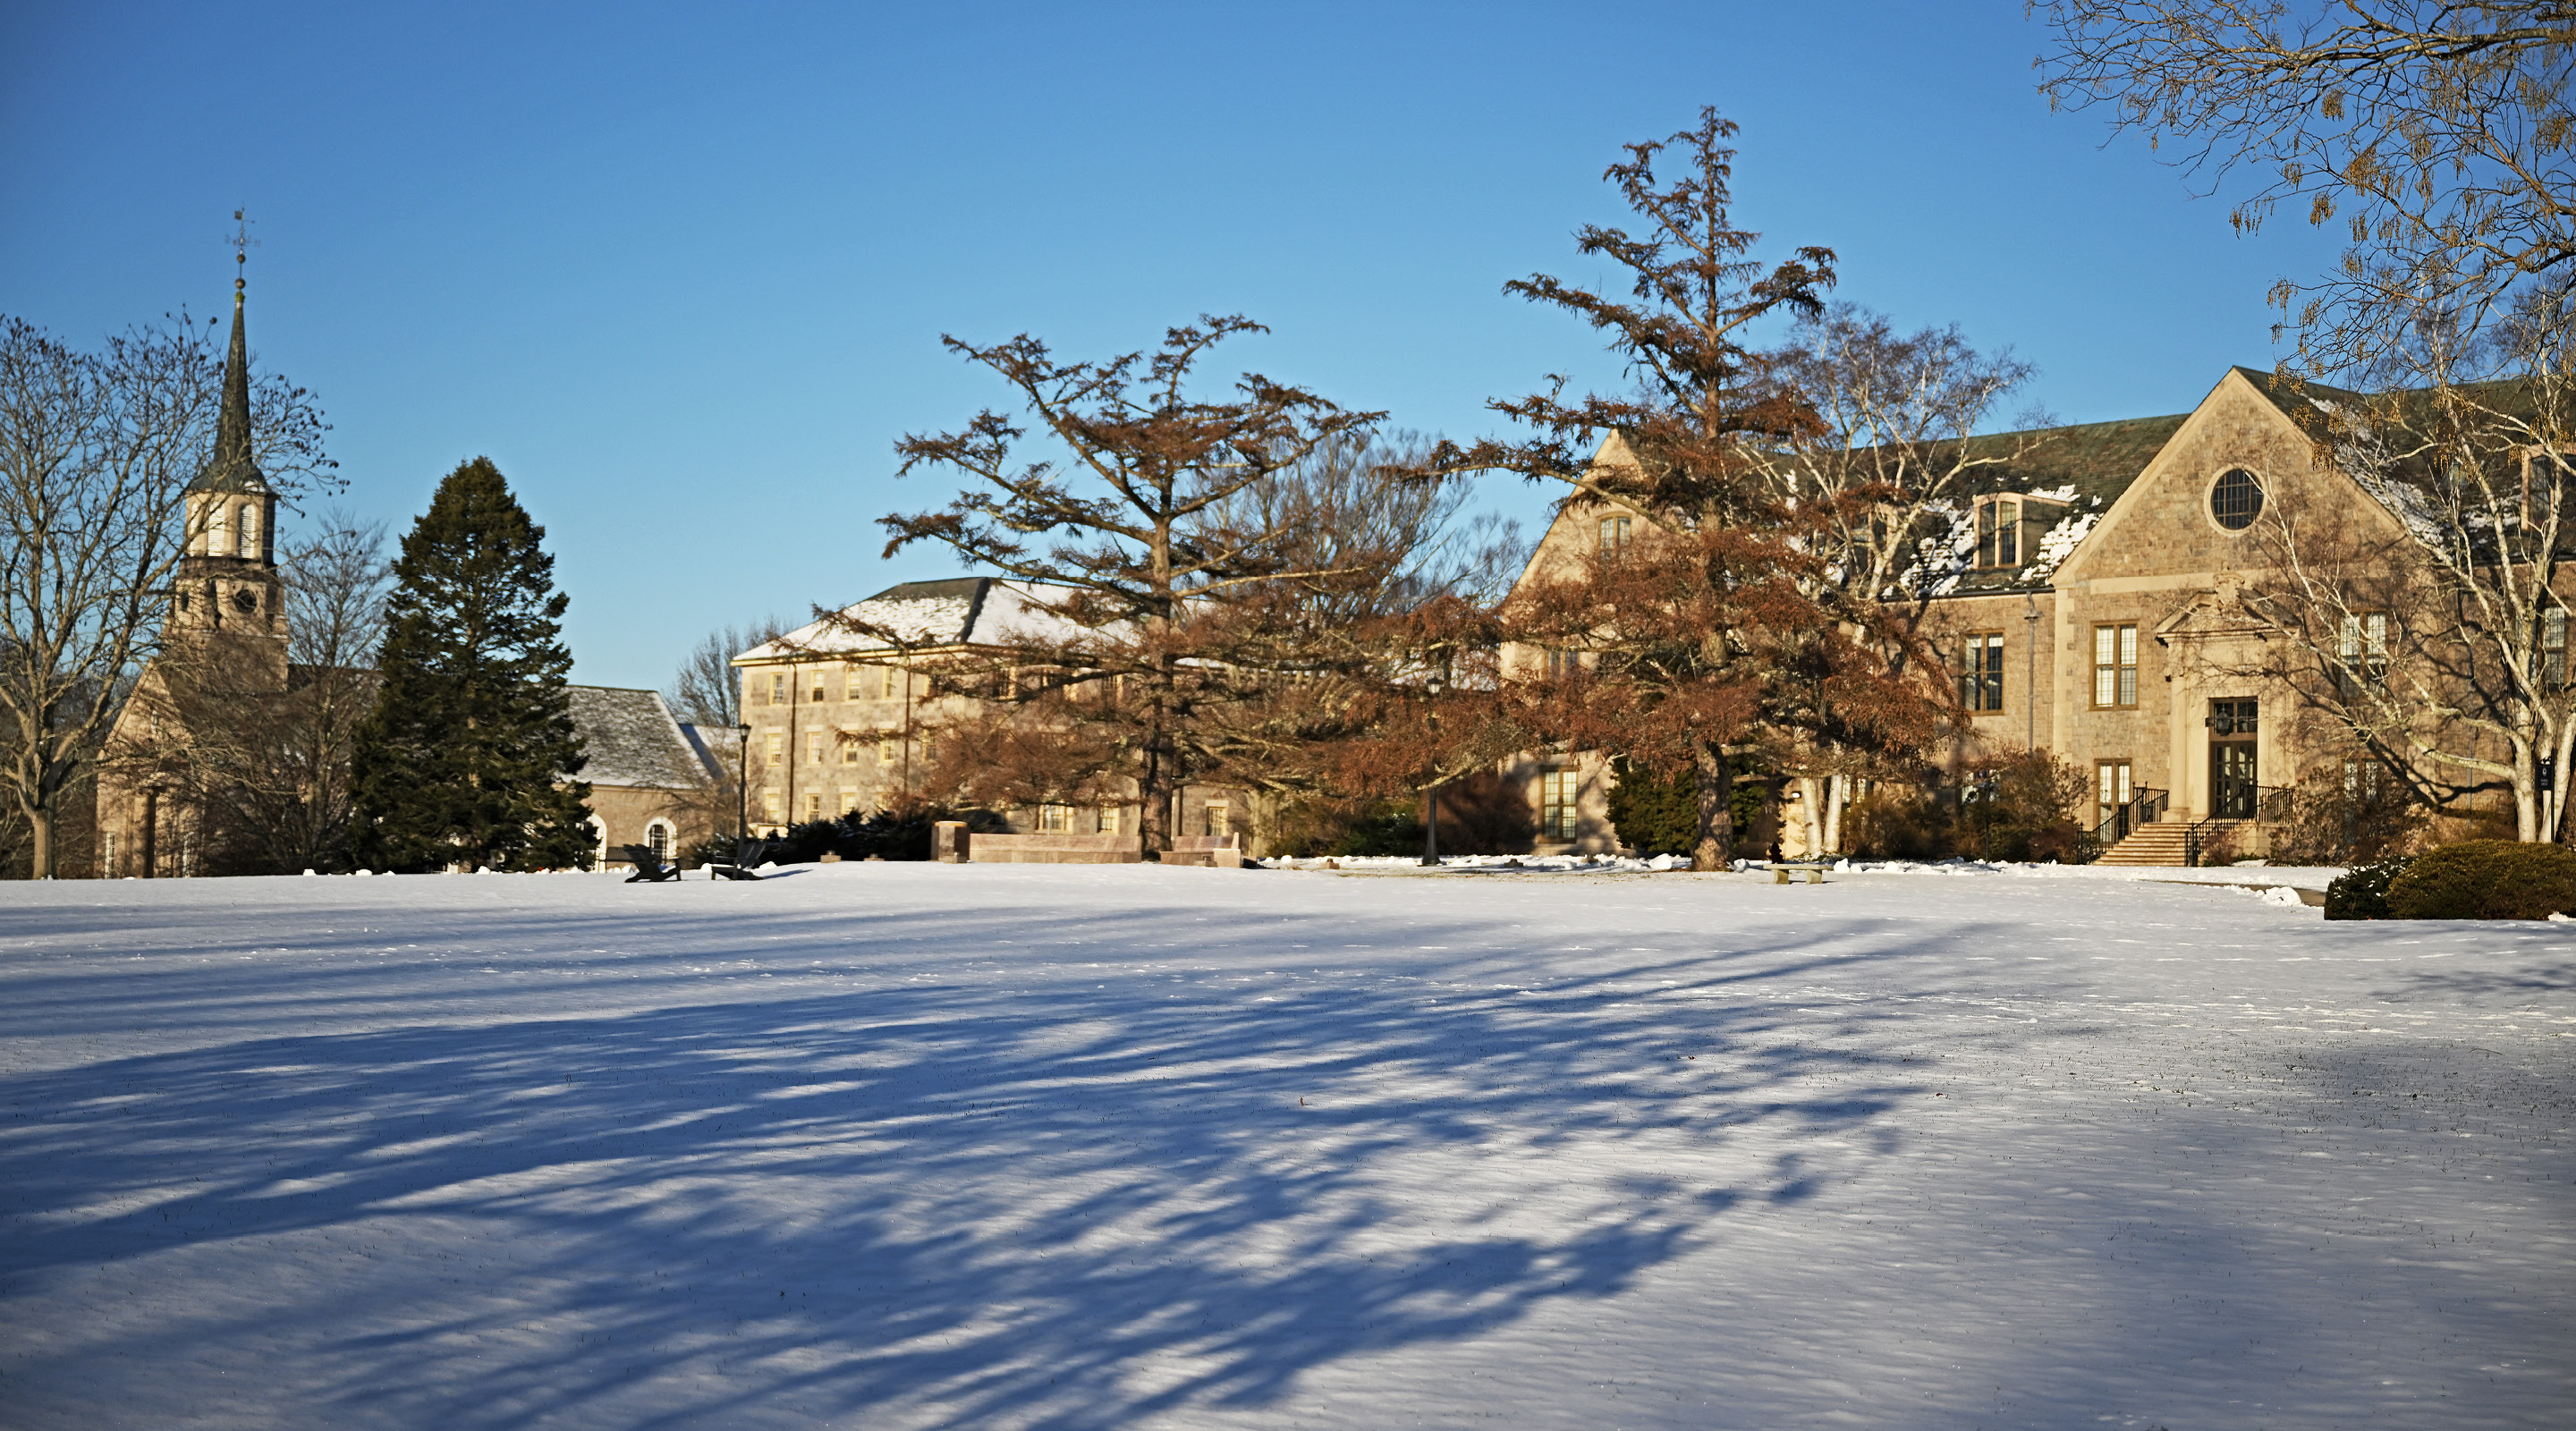 The campus green covered in snow